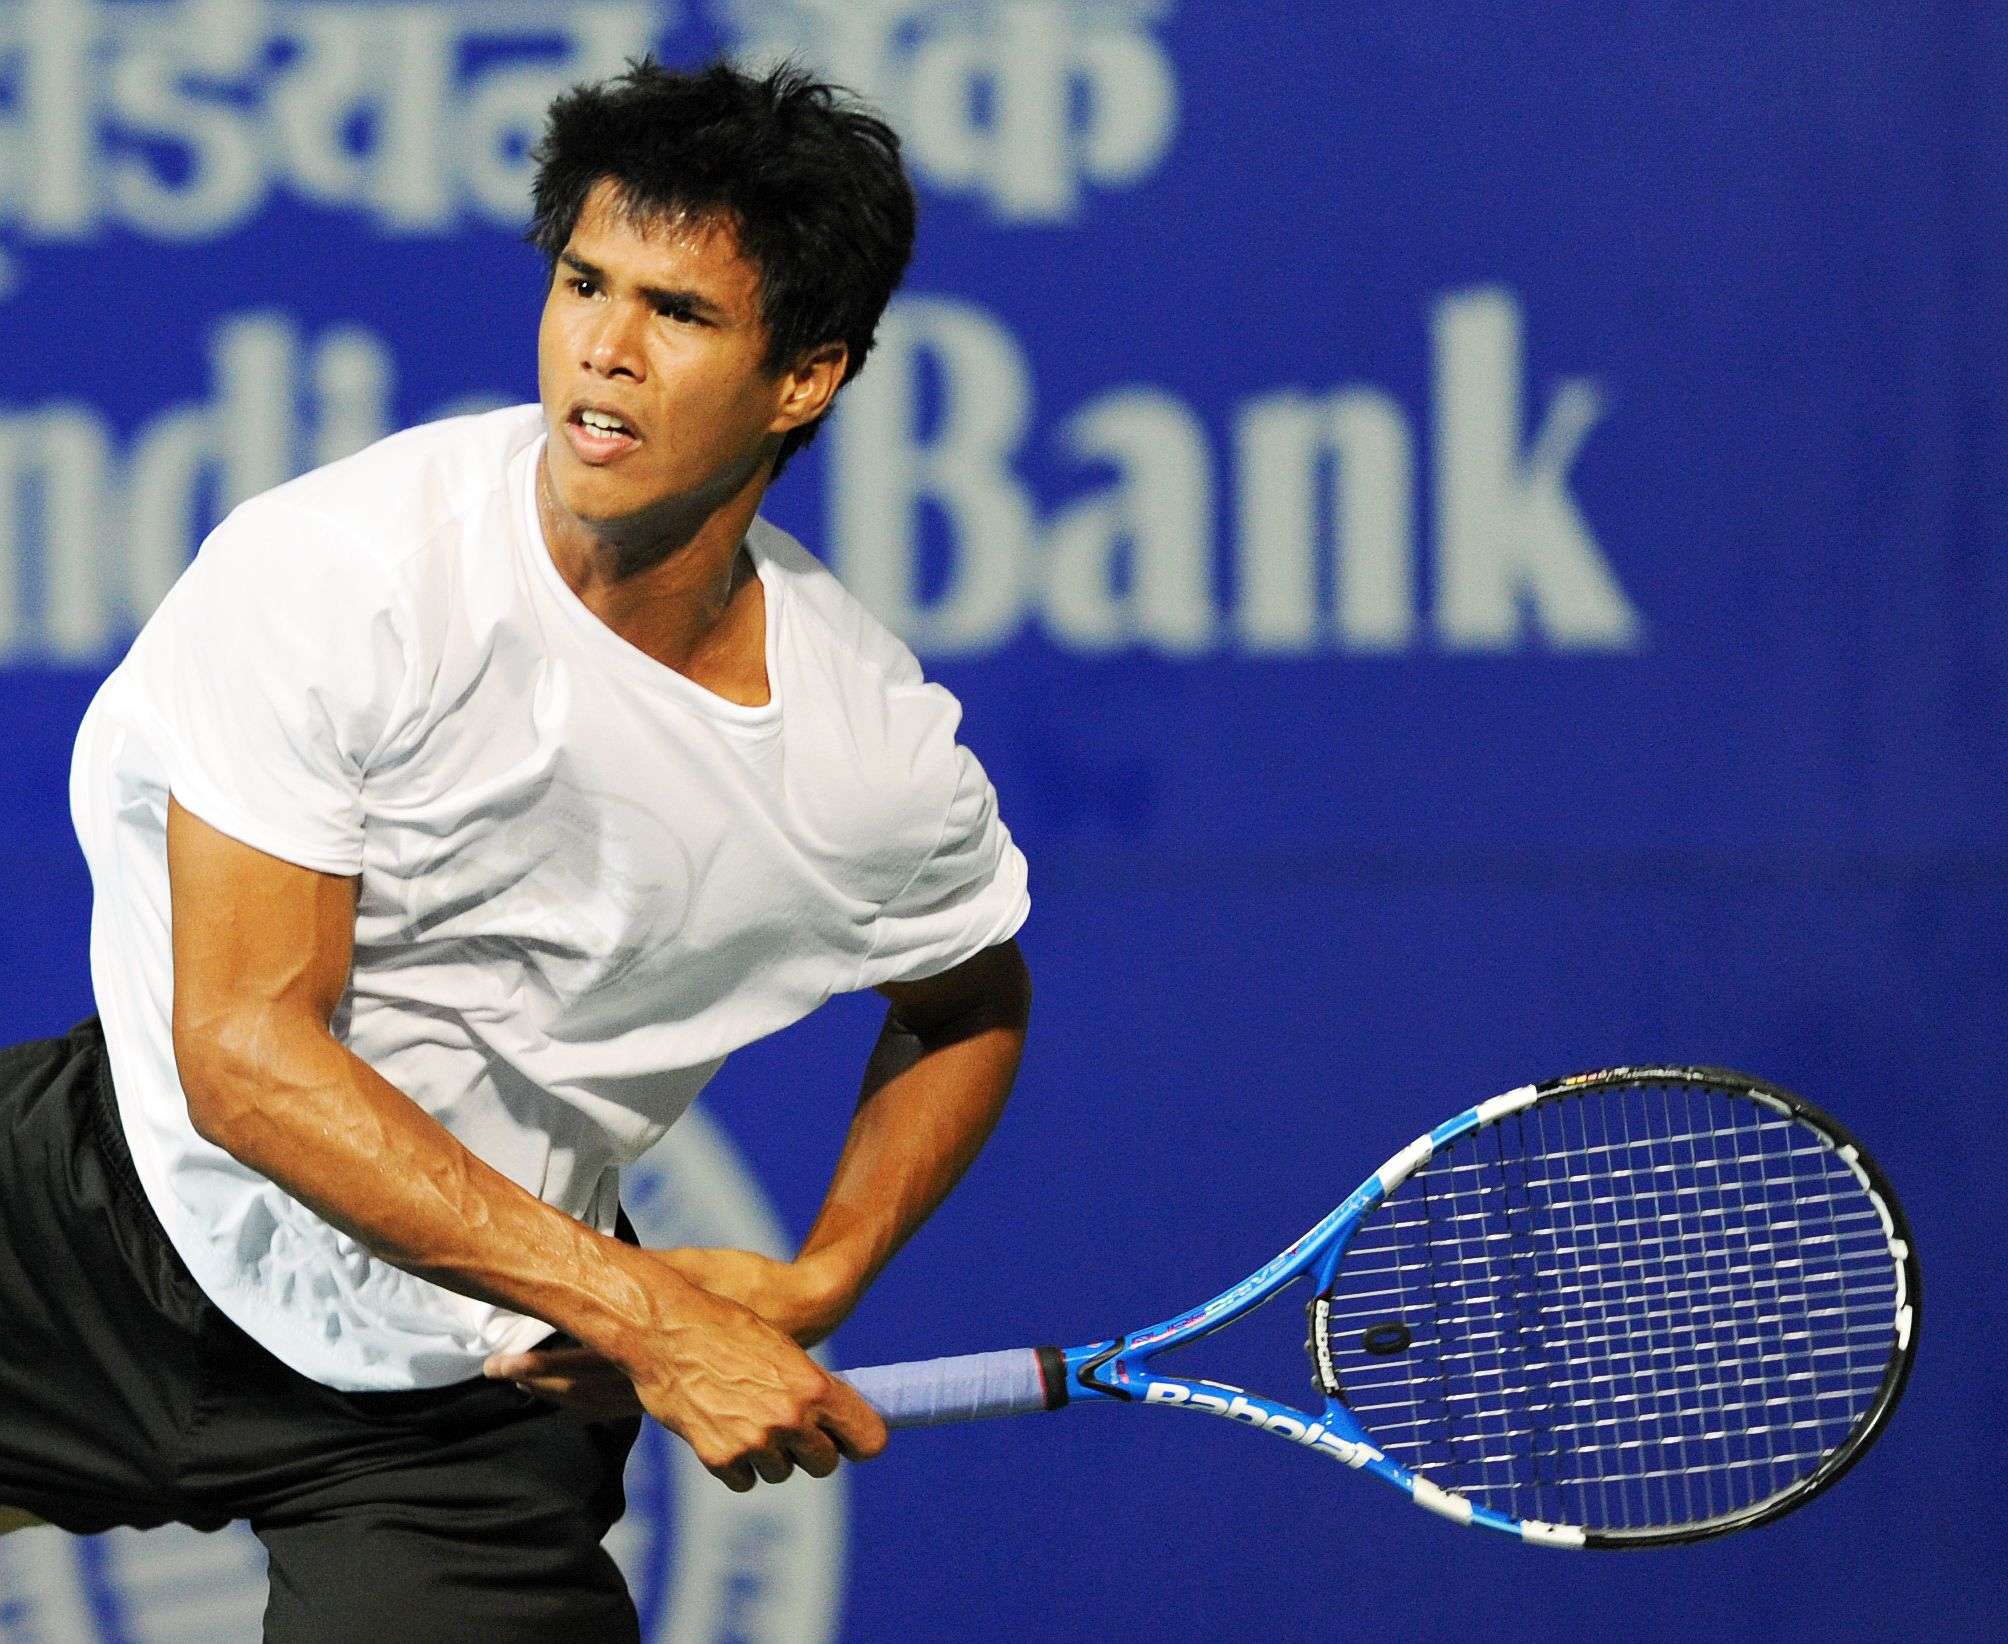 Current and former tennis players pay tribute to Somdev